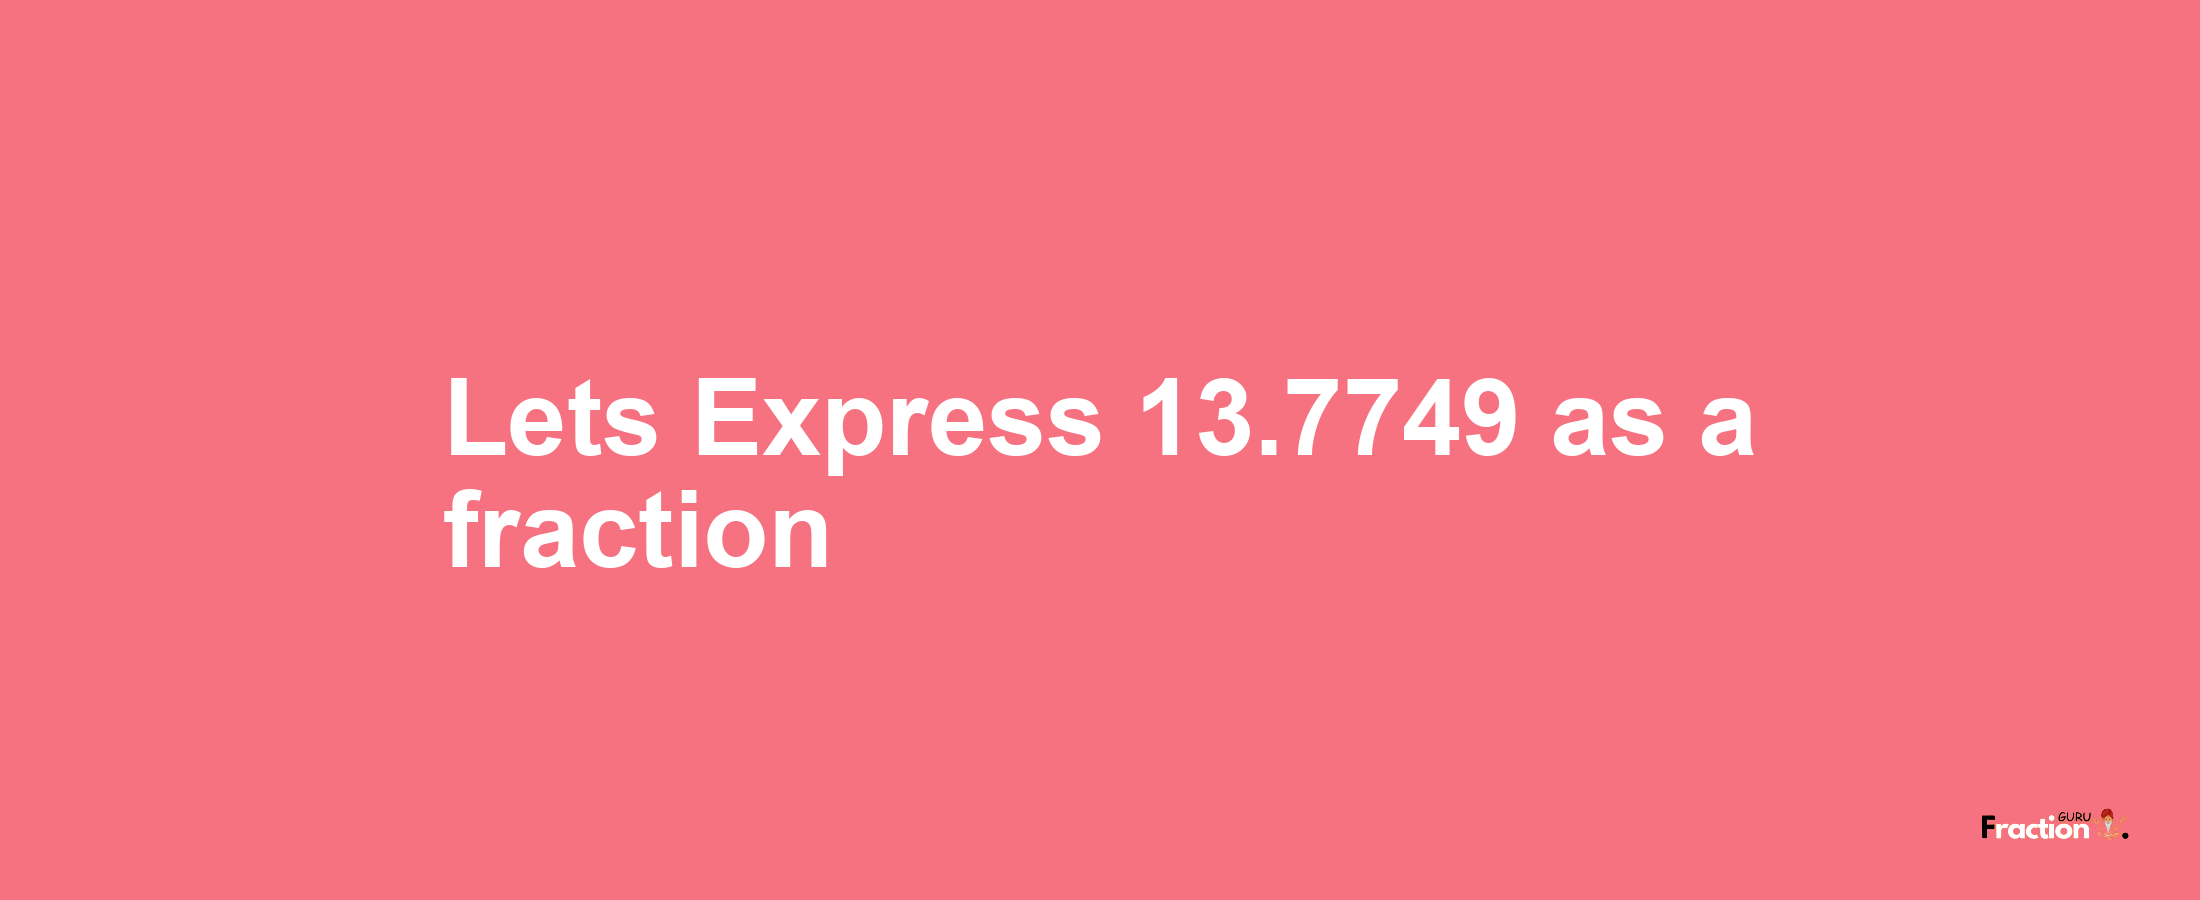 Lets Express 13.7749 as afraction